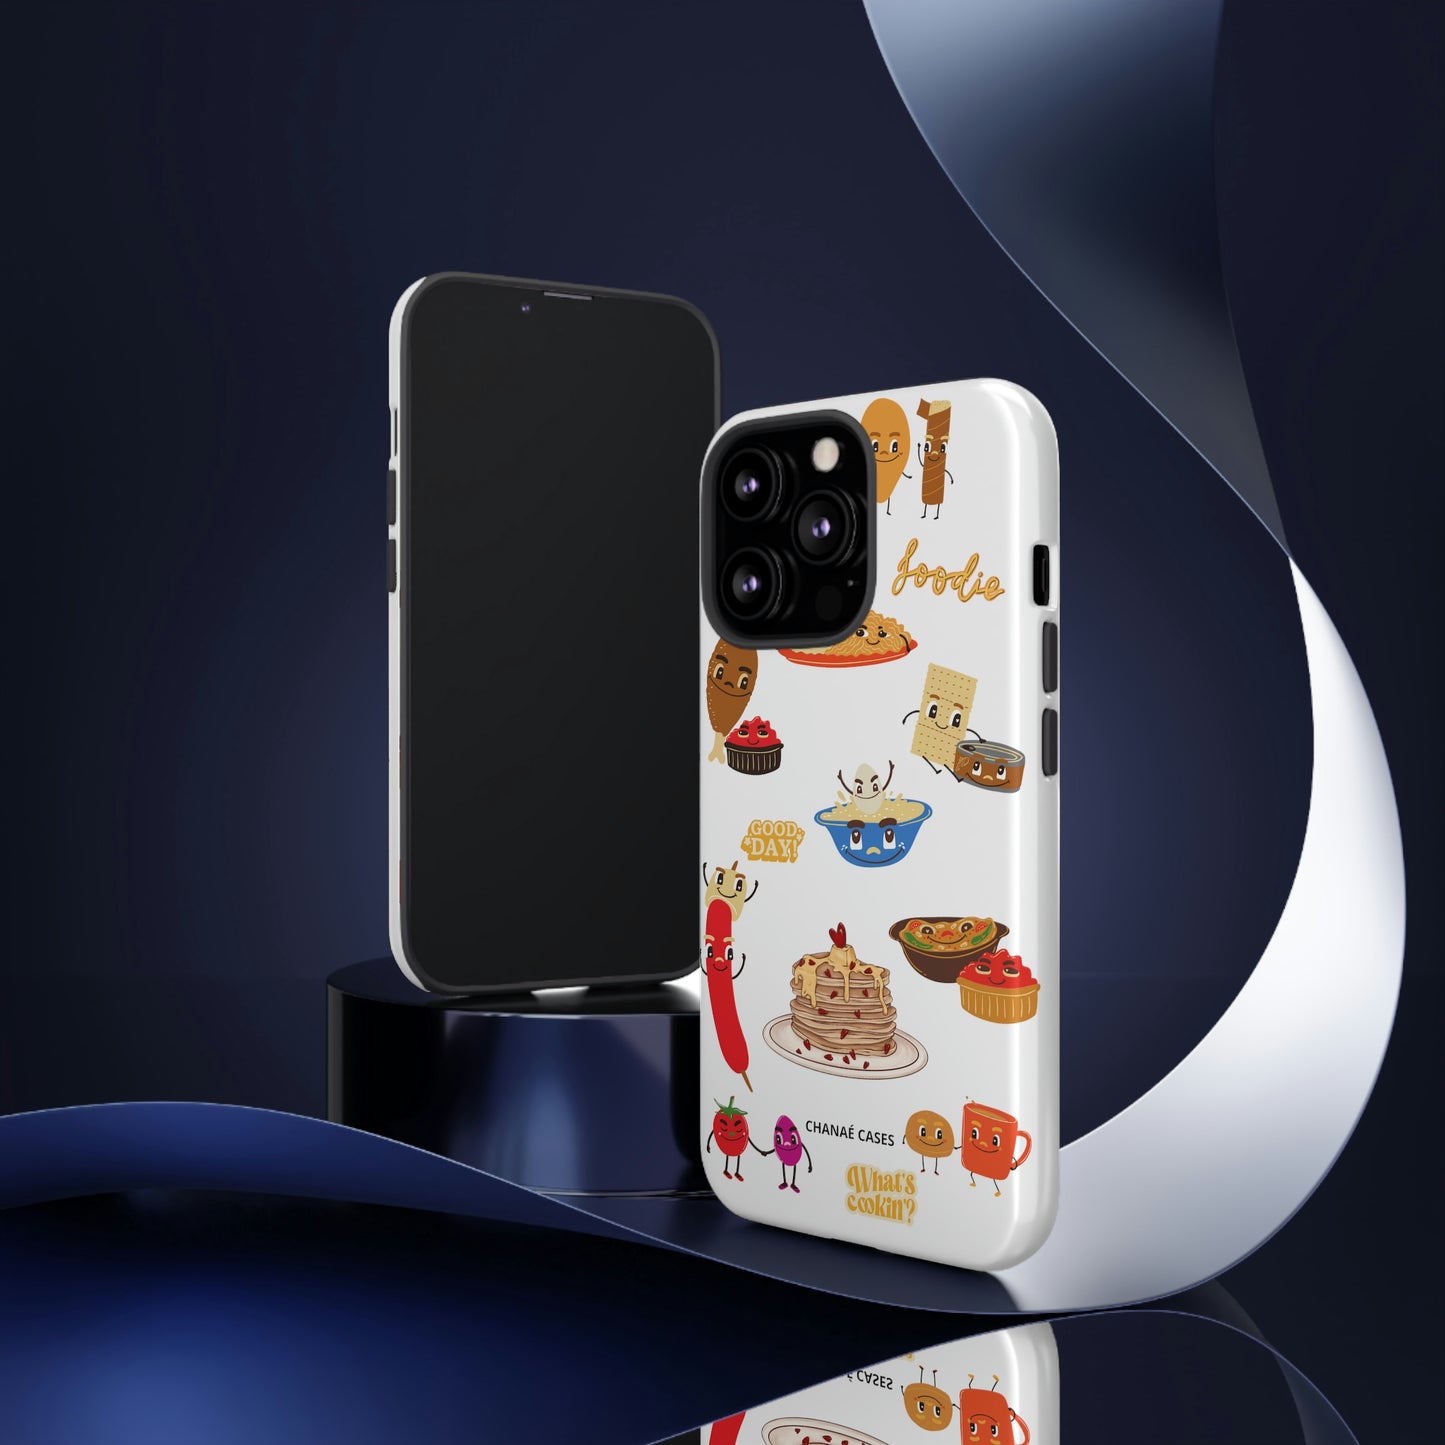 What's Cooking? iPhone "Tough" Case (White)